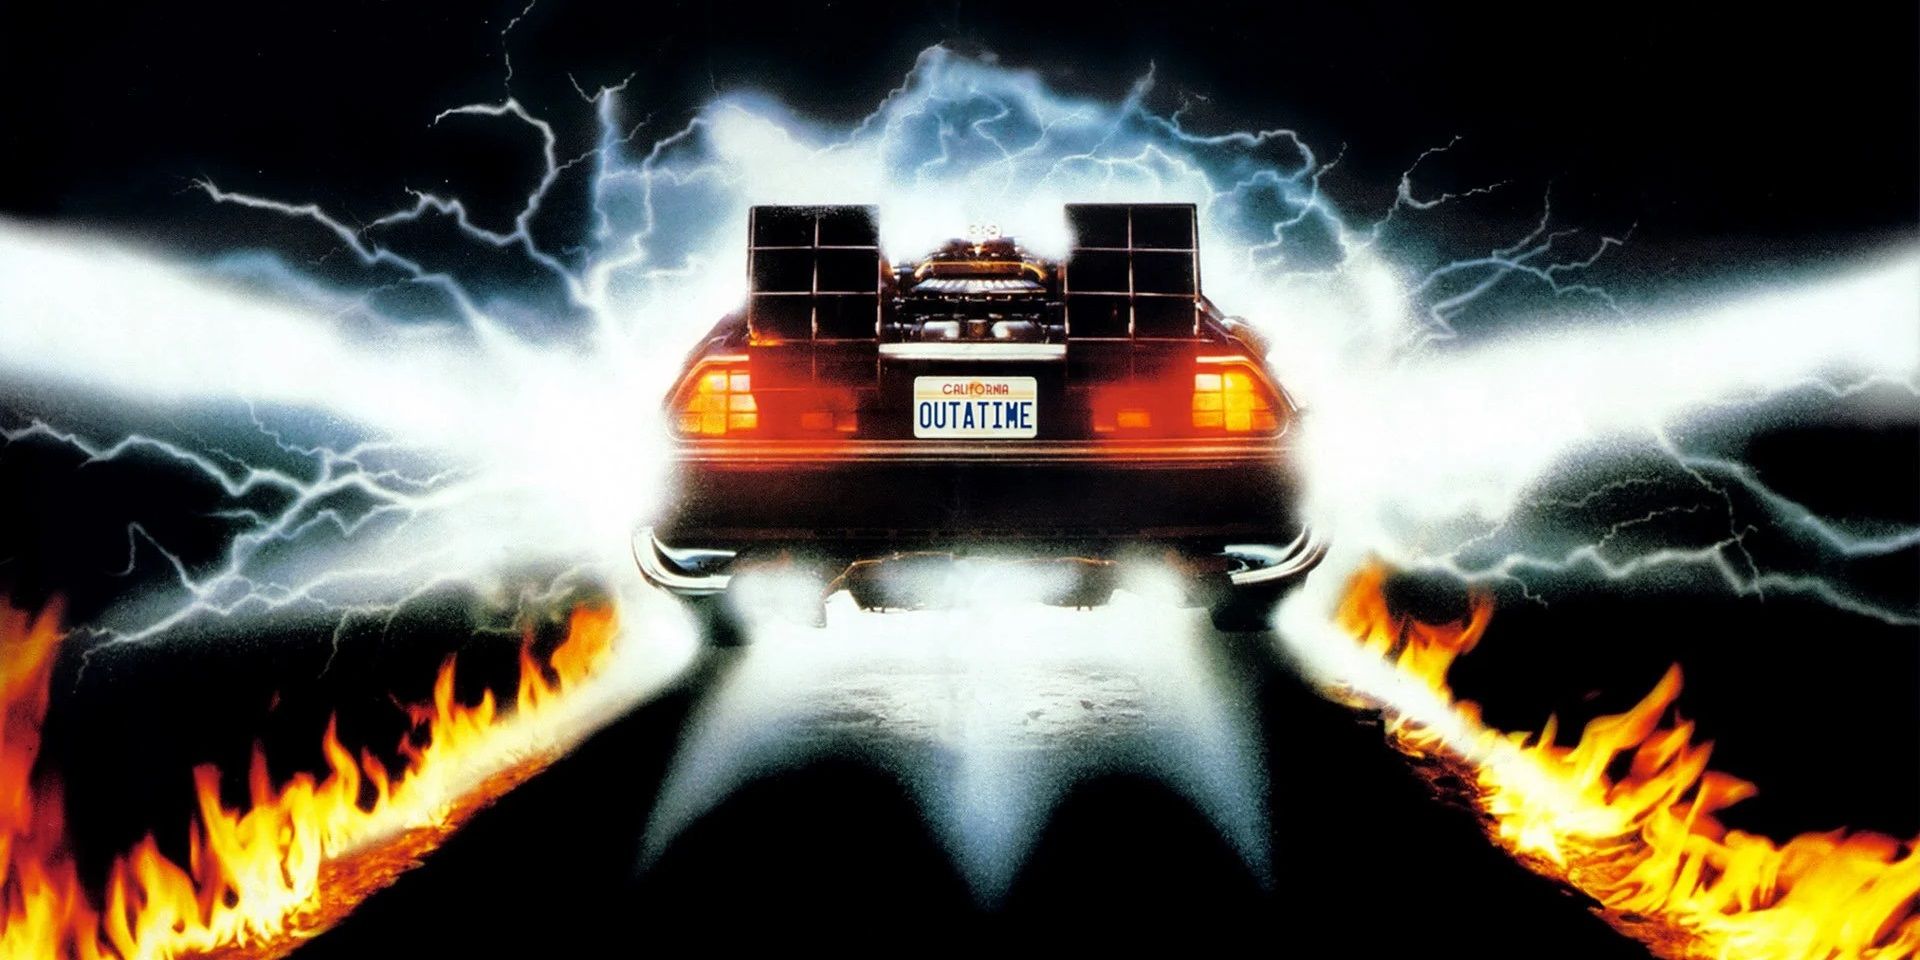 Fast and Furious time travel back to the future